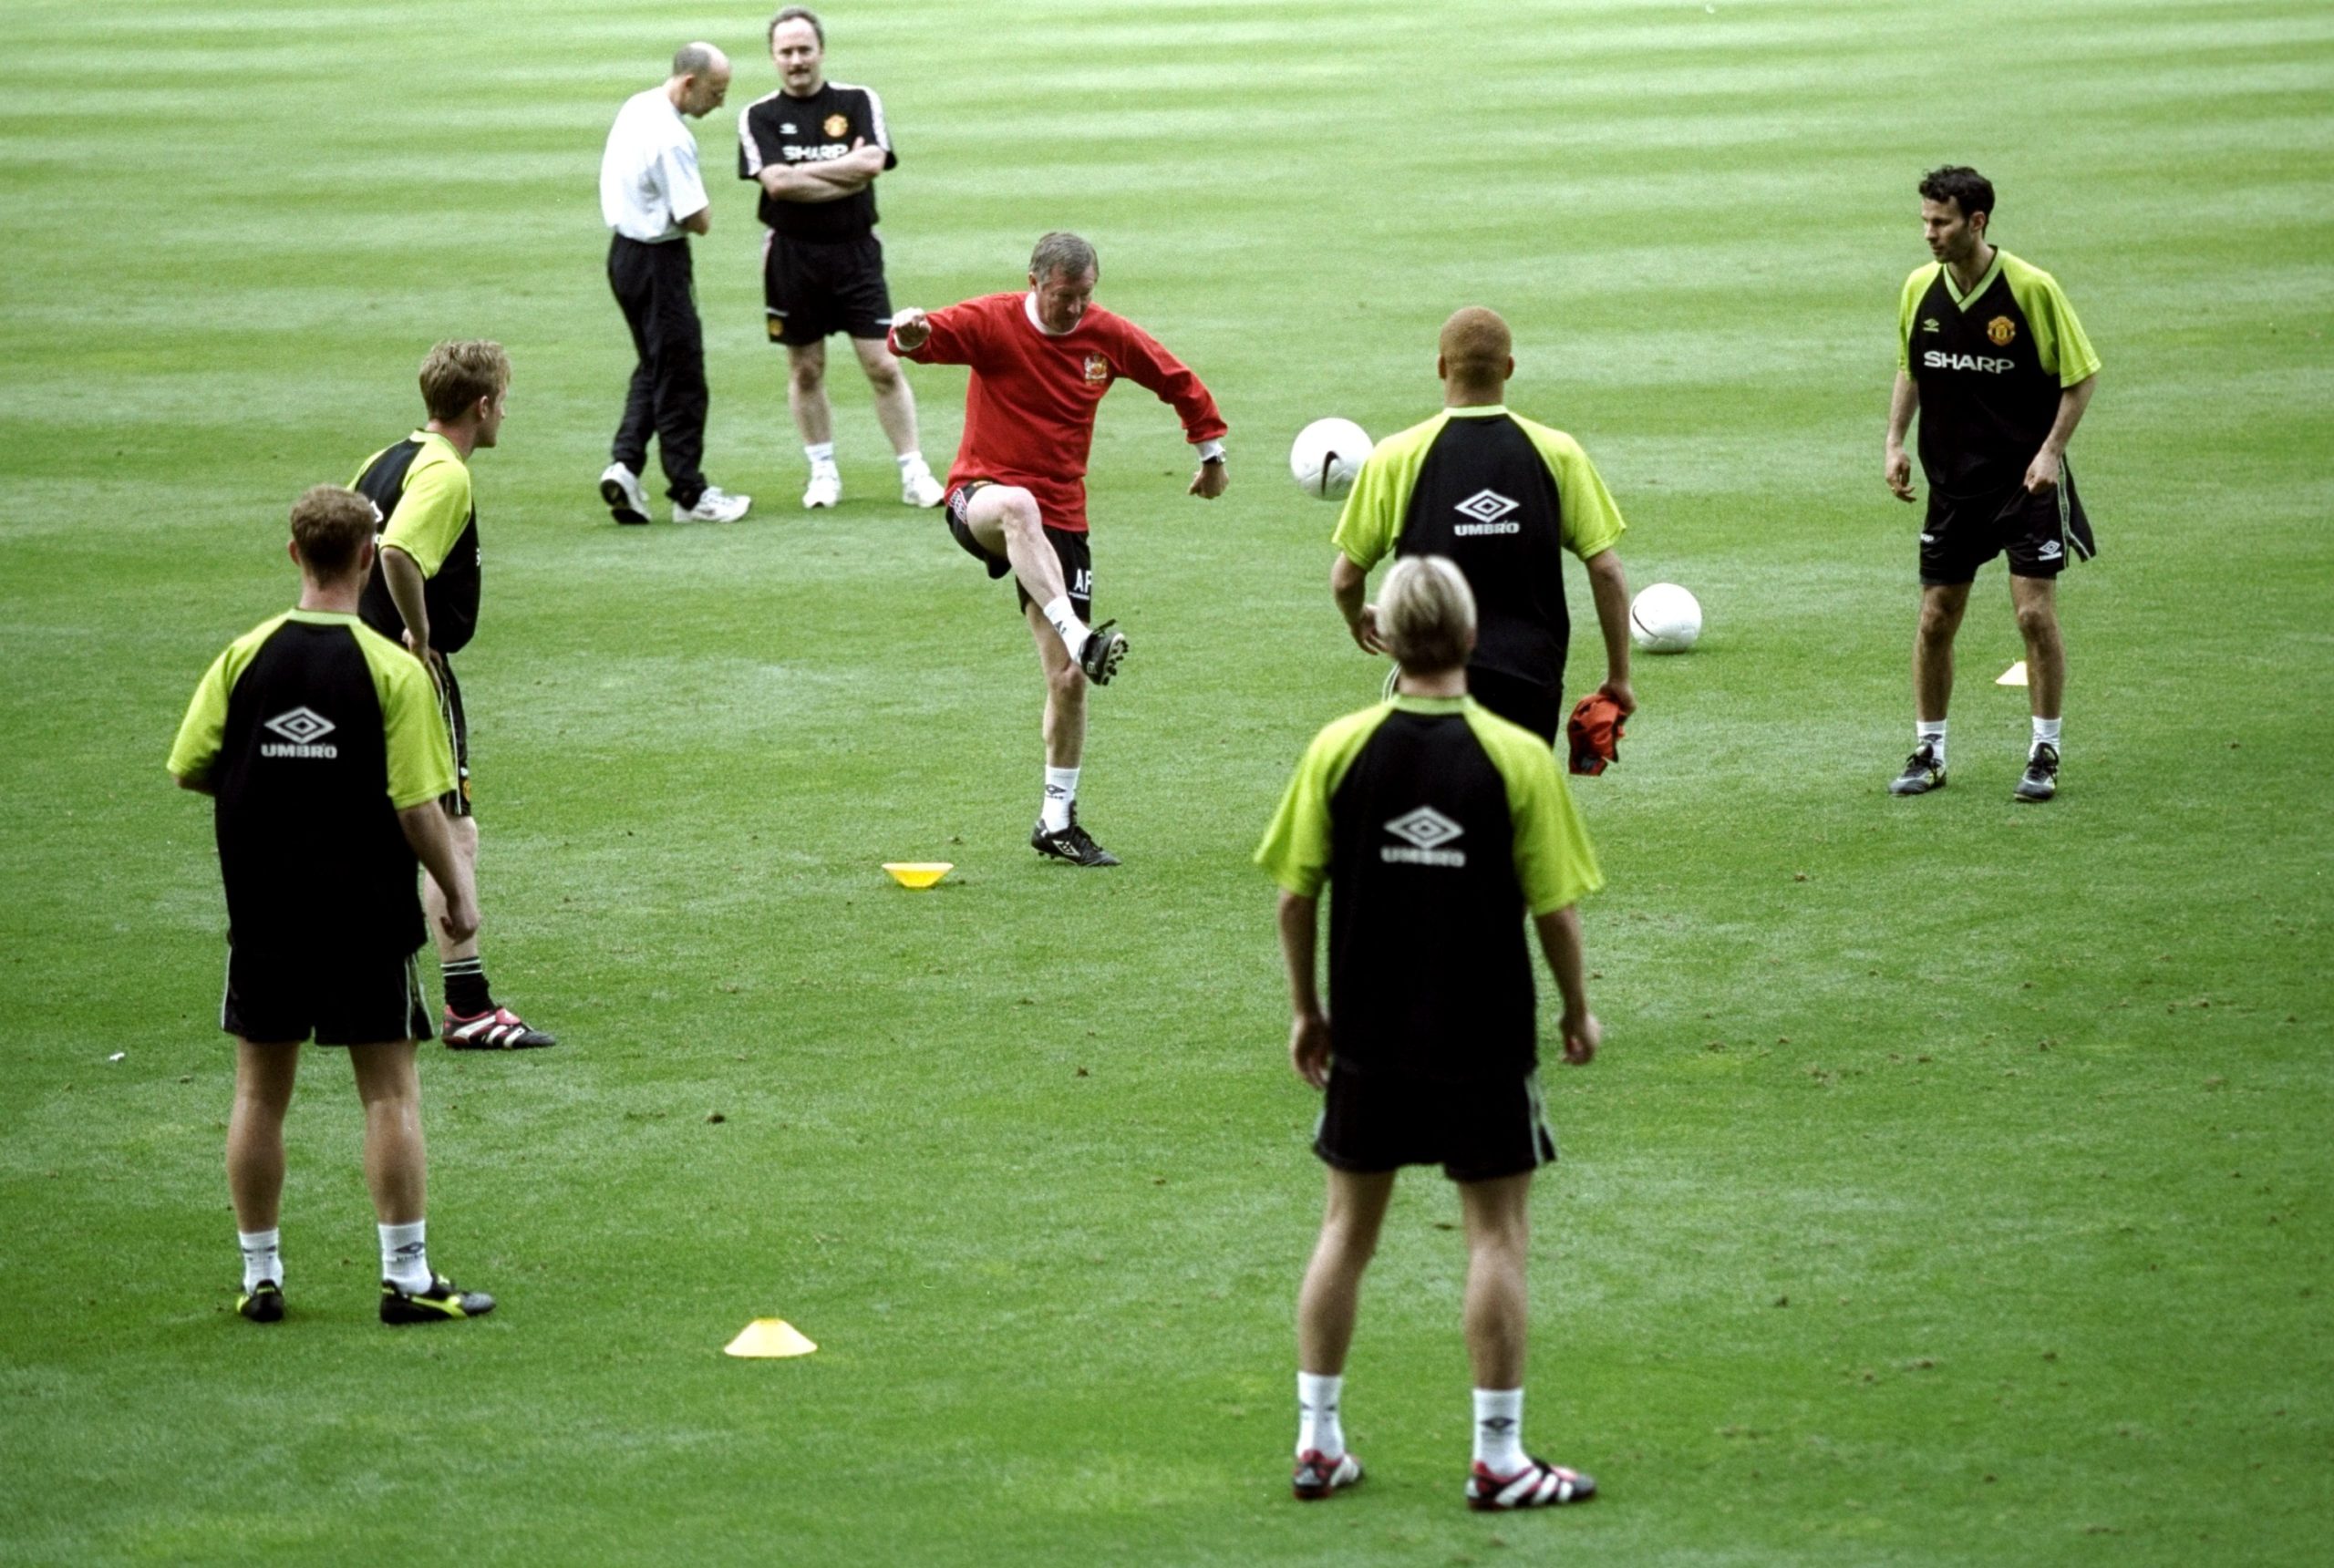 John Curtis training with Manchester United